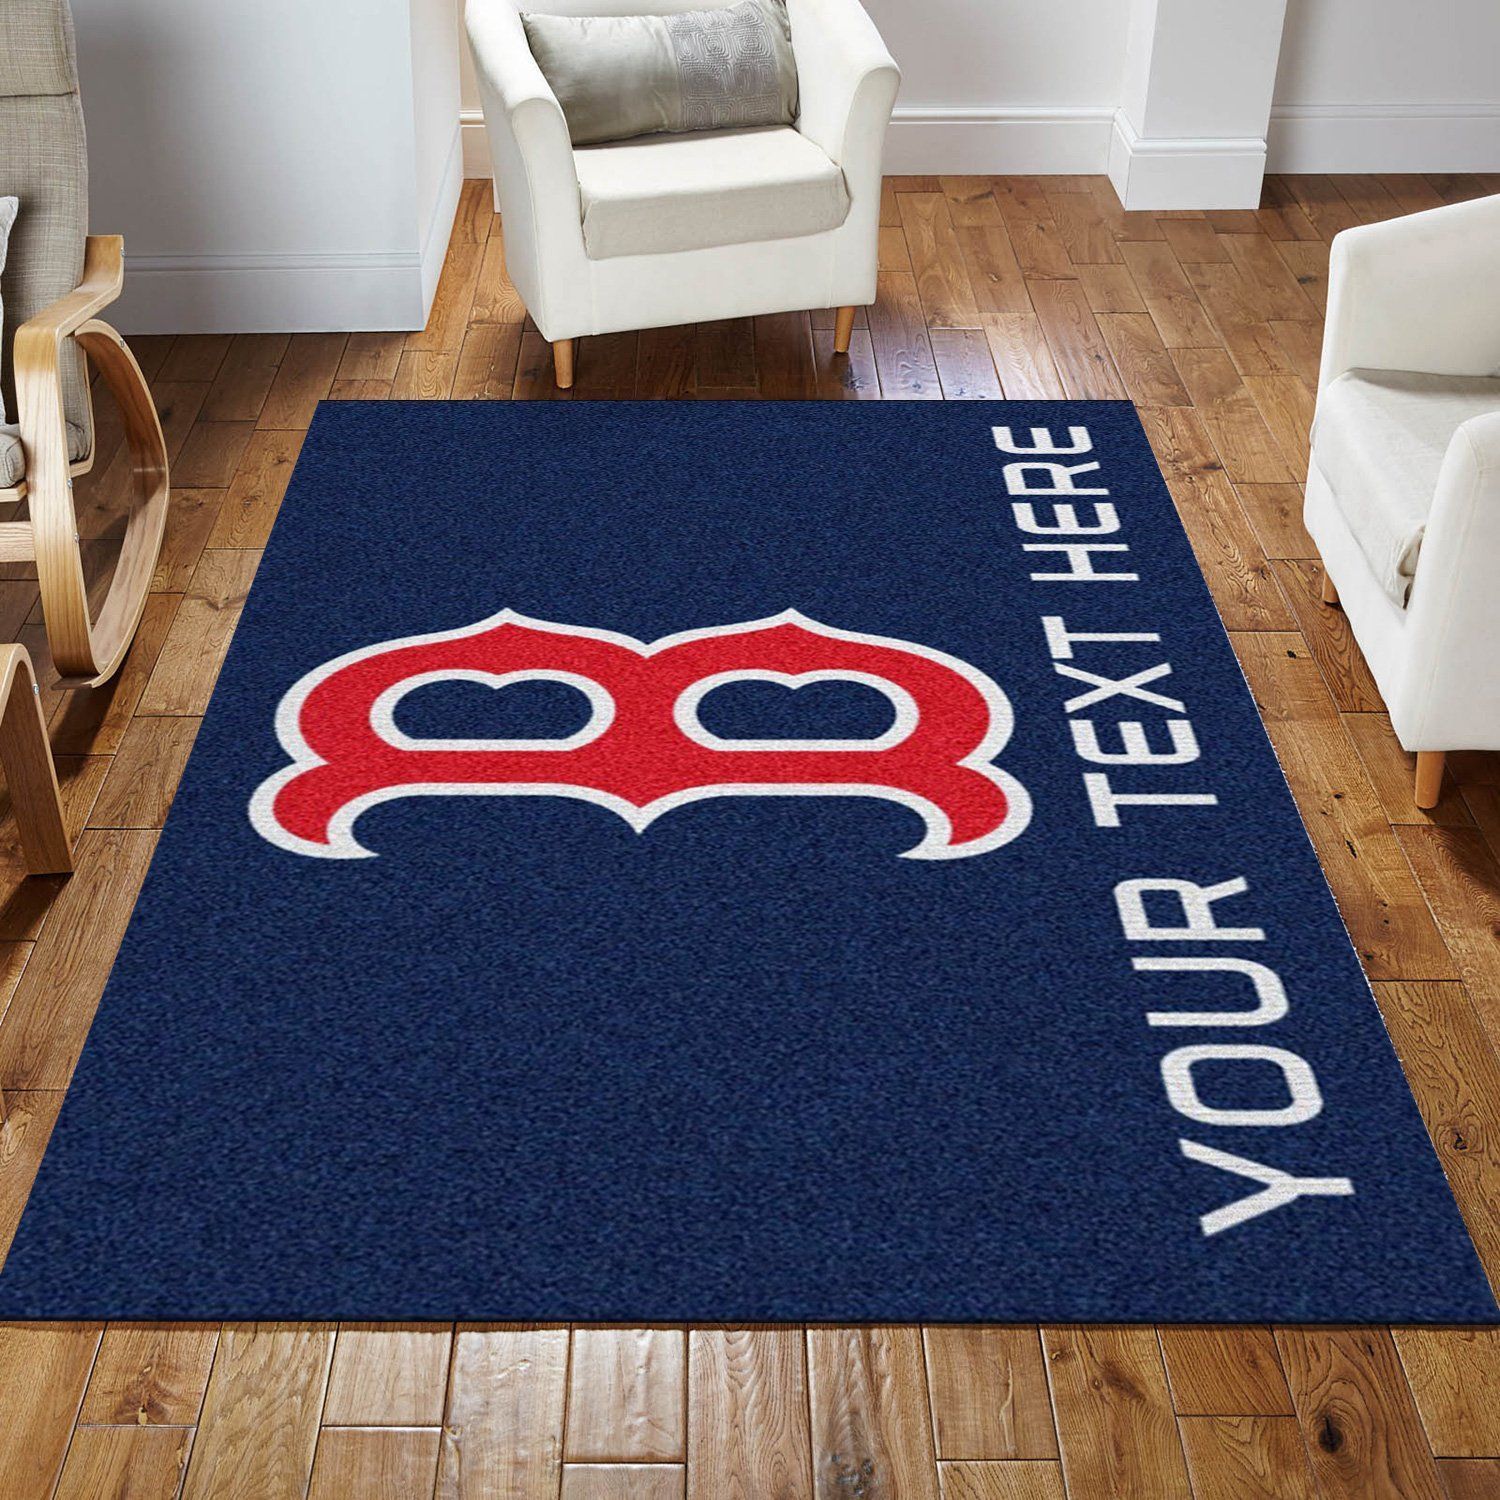 Customizable Boston Red Sox Personalized Accent Rug MLB Team Logos, Living room and bedroom Rug, US Gift Decor - Indoor Outdoor Rugs 3